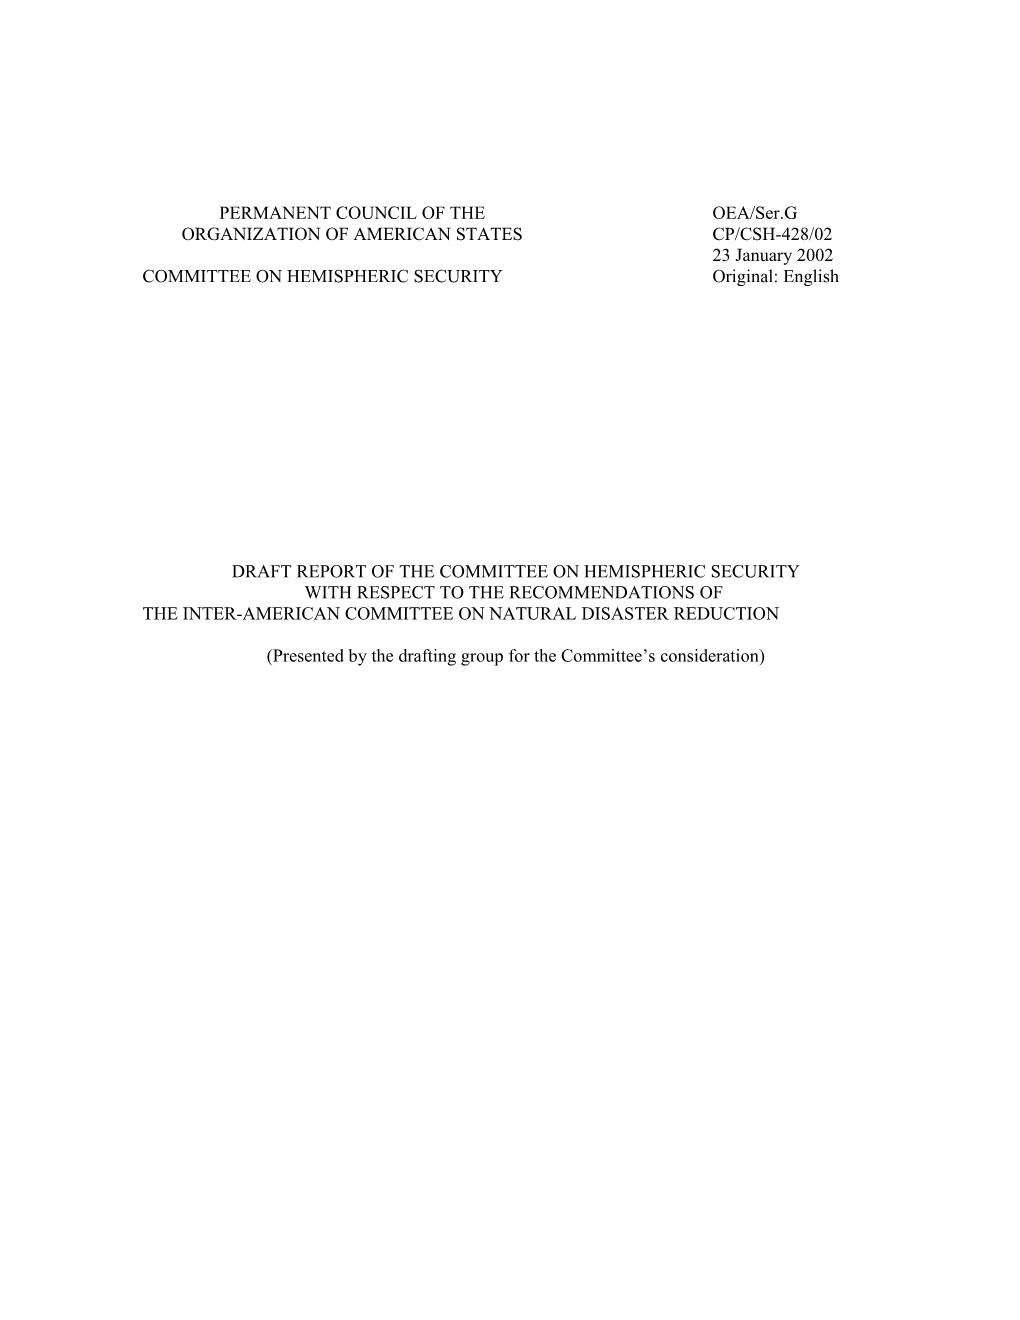 Draft Report of the Committee on Hemispheric Security